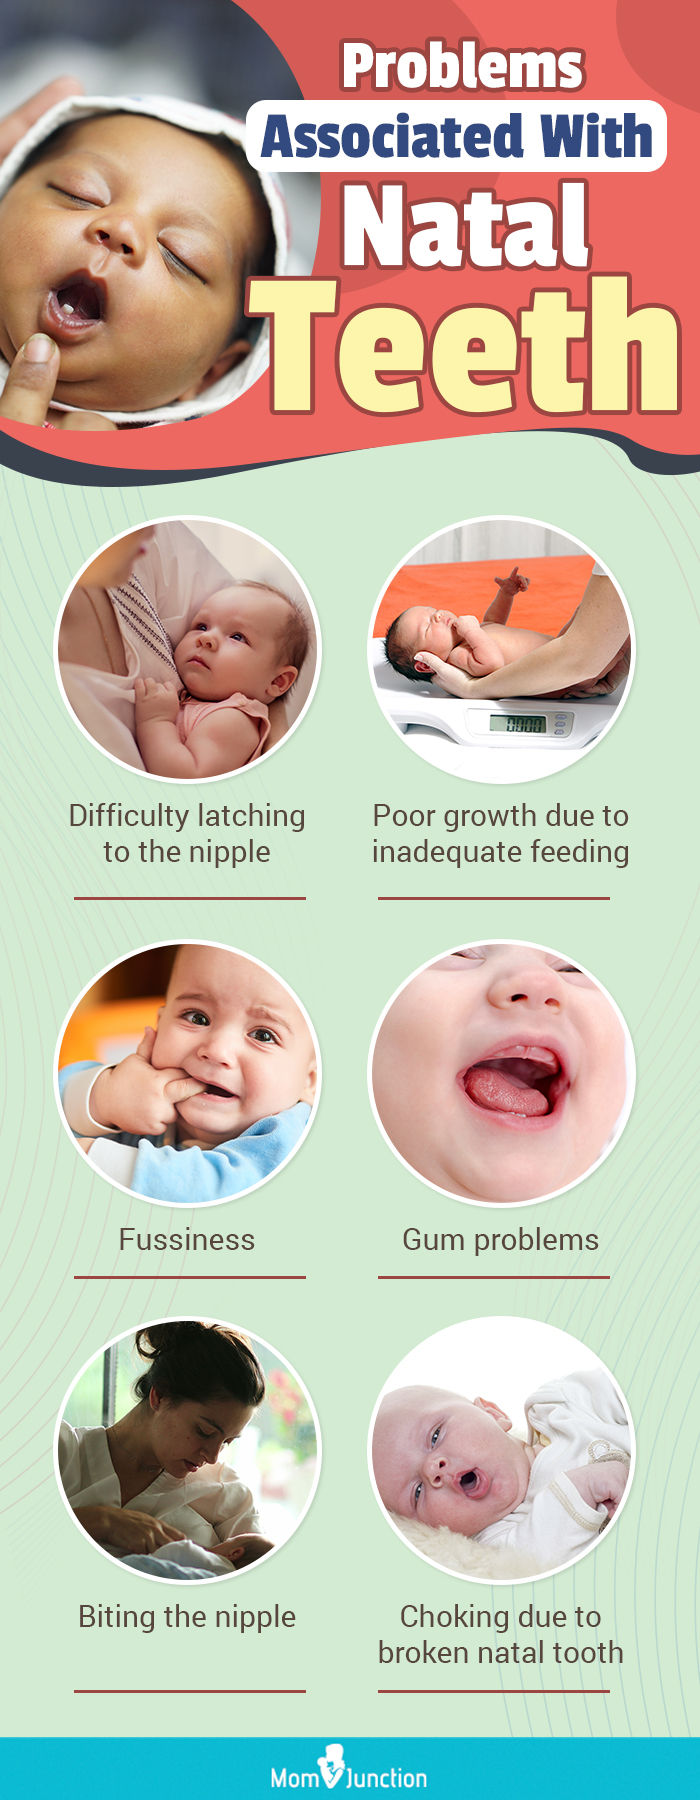 Problems Associated With Natal Teeth 